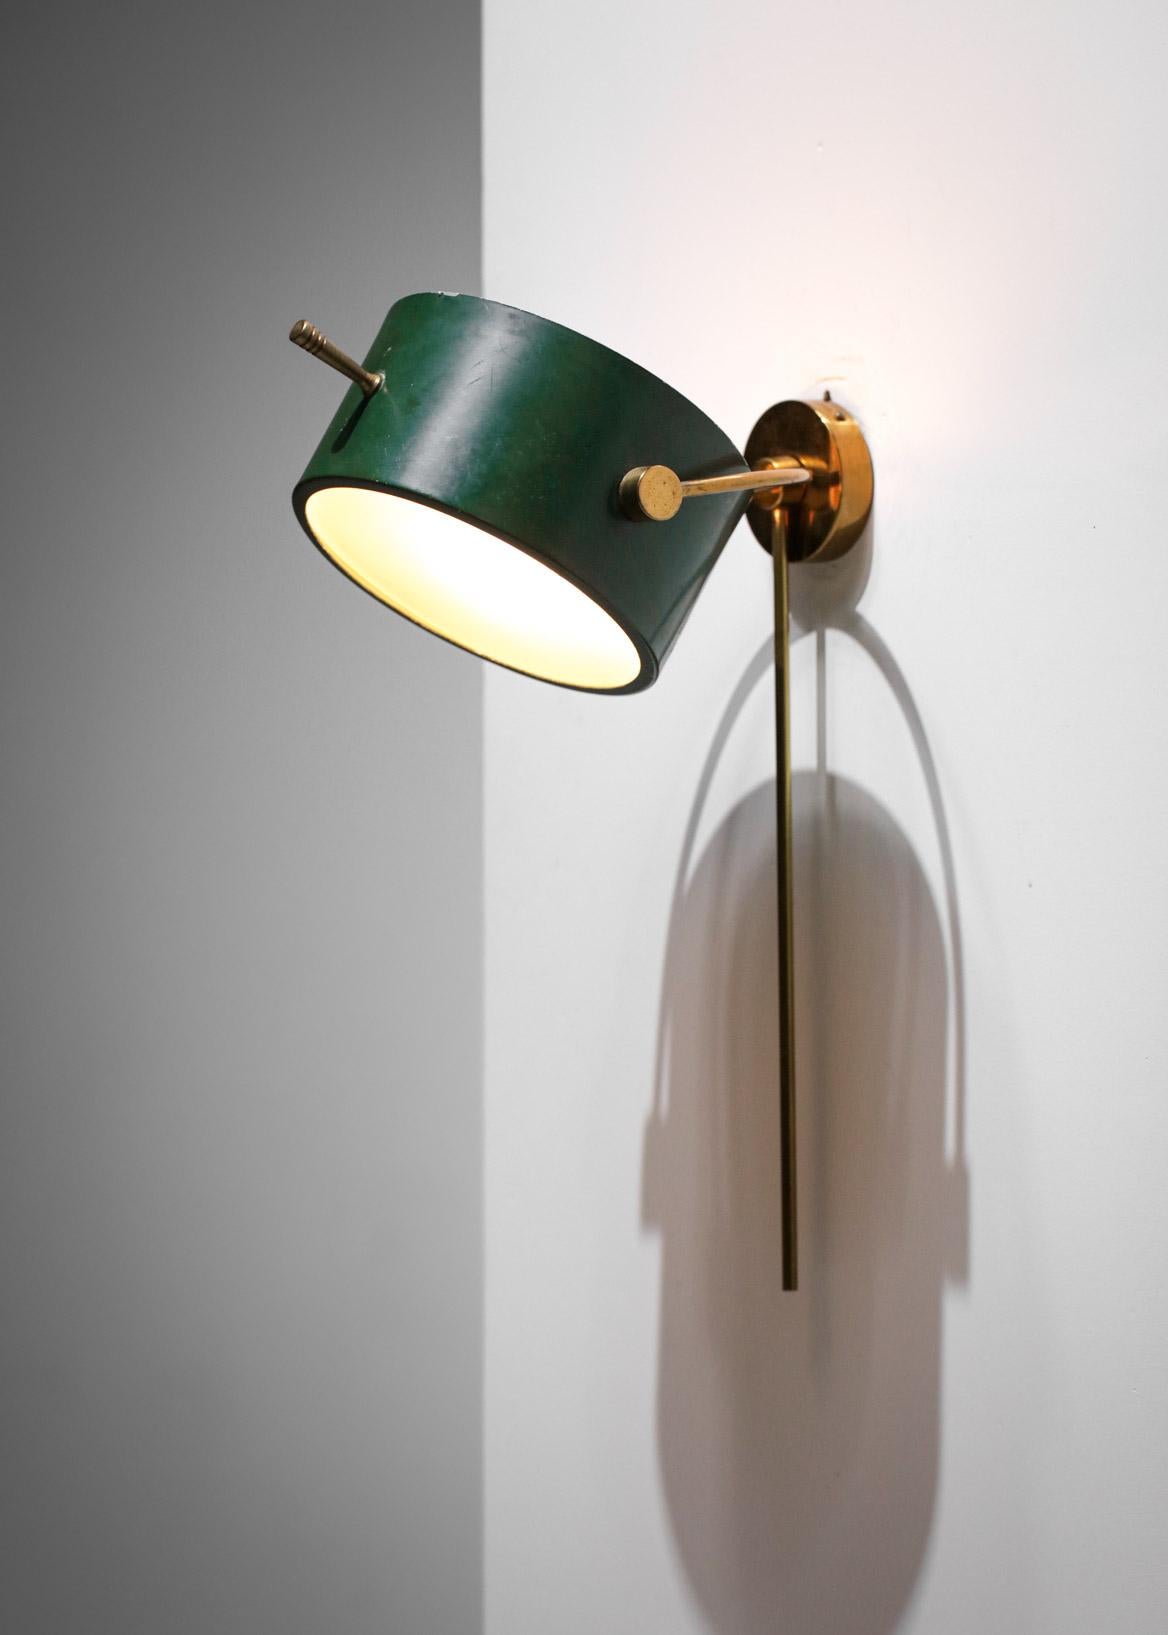 Rare 50's French Wall Lamp by Lunel Dark Green in Style of Mathieu Mategot, F420 3